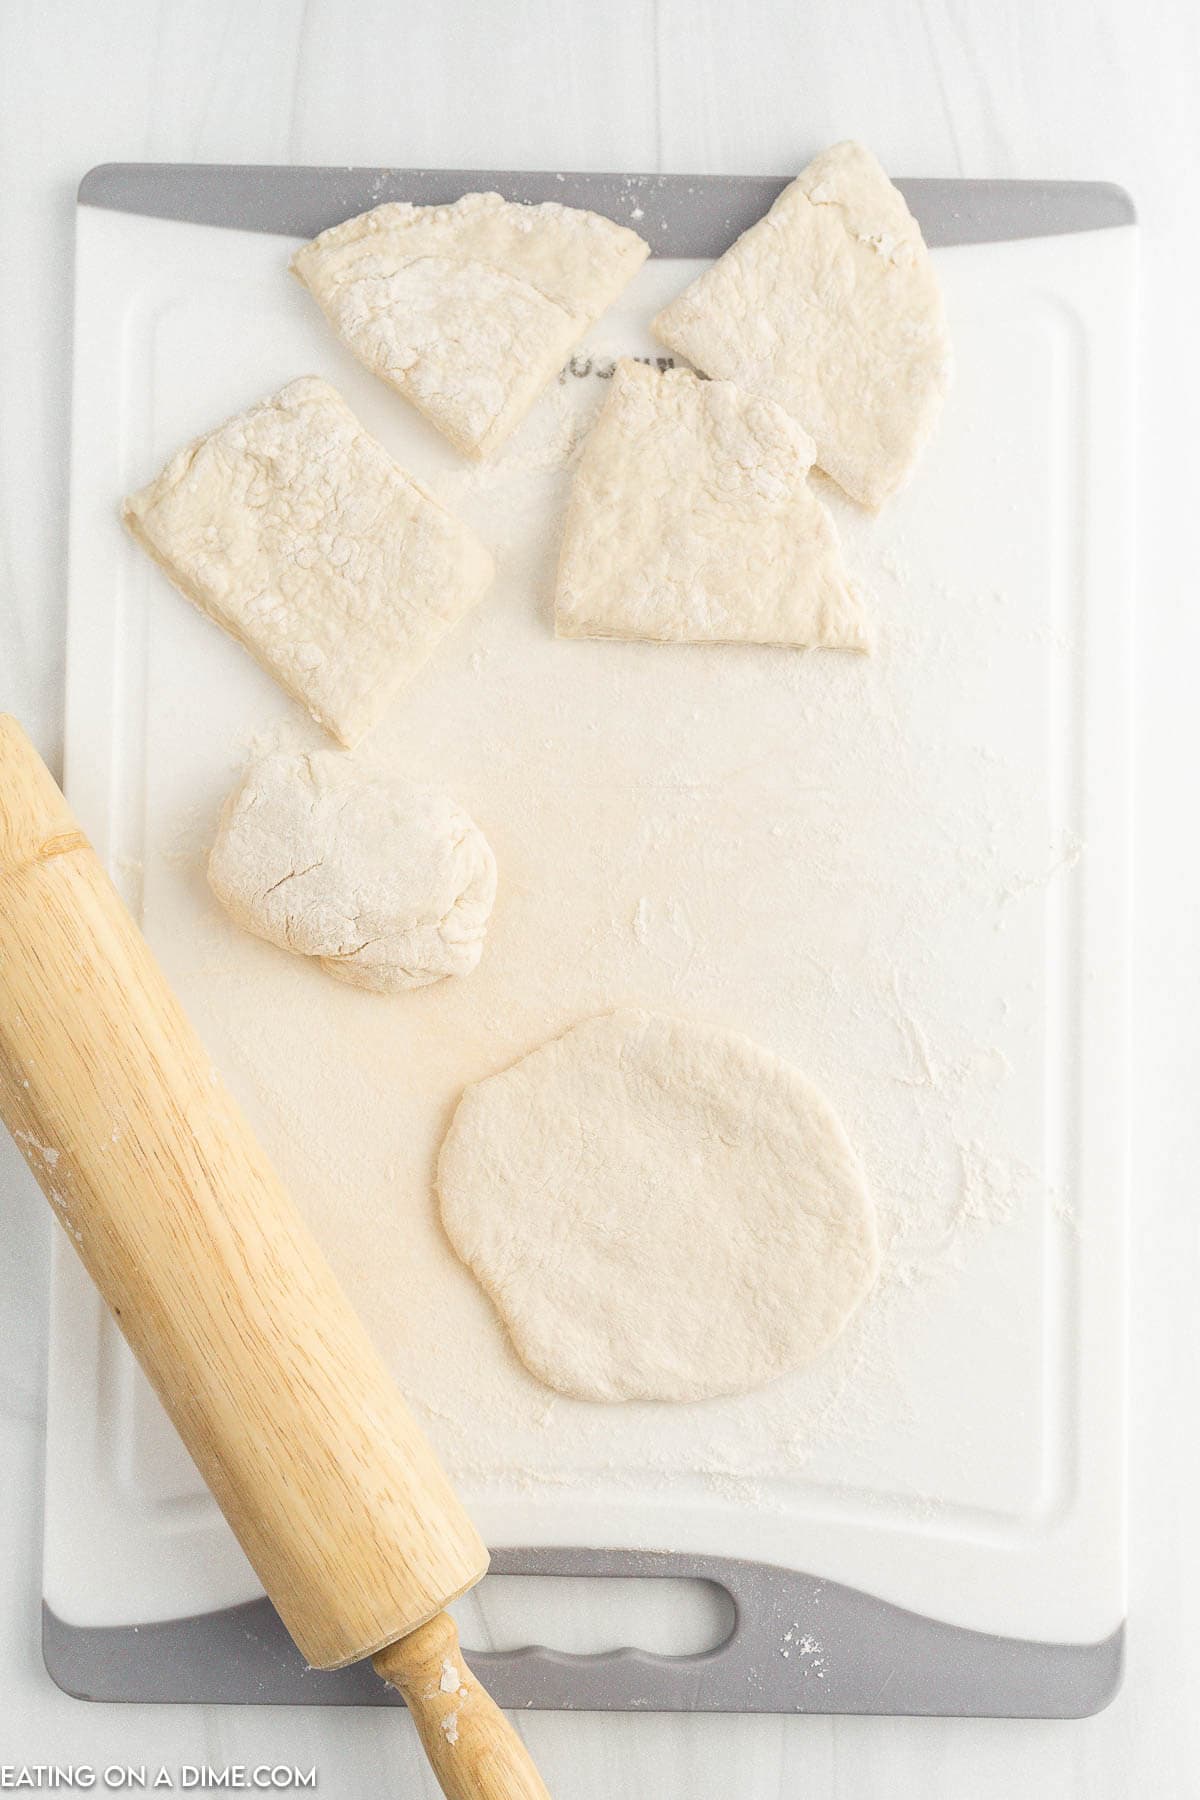 Rolling dough to flatten with a rolling pin on the cutting board